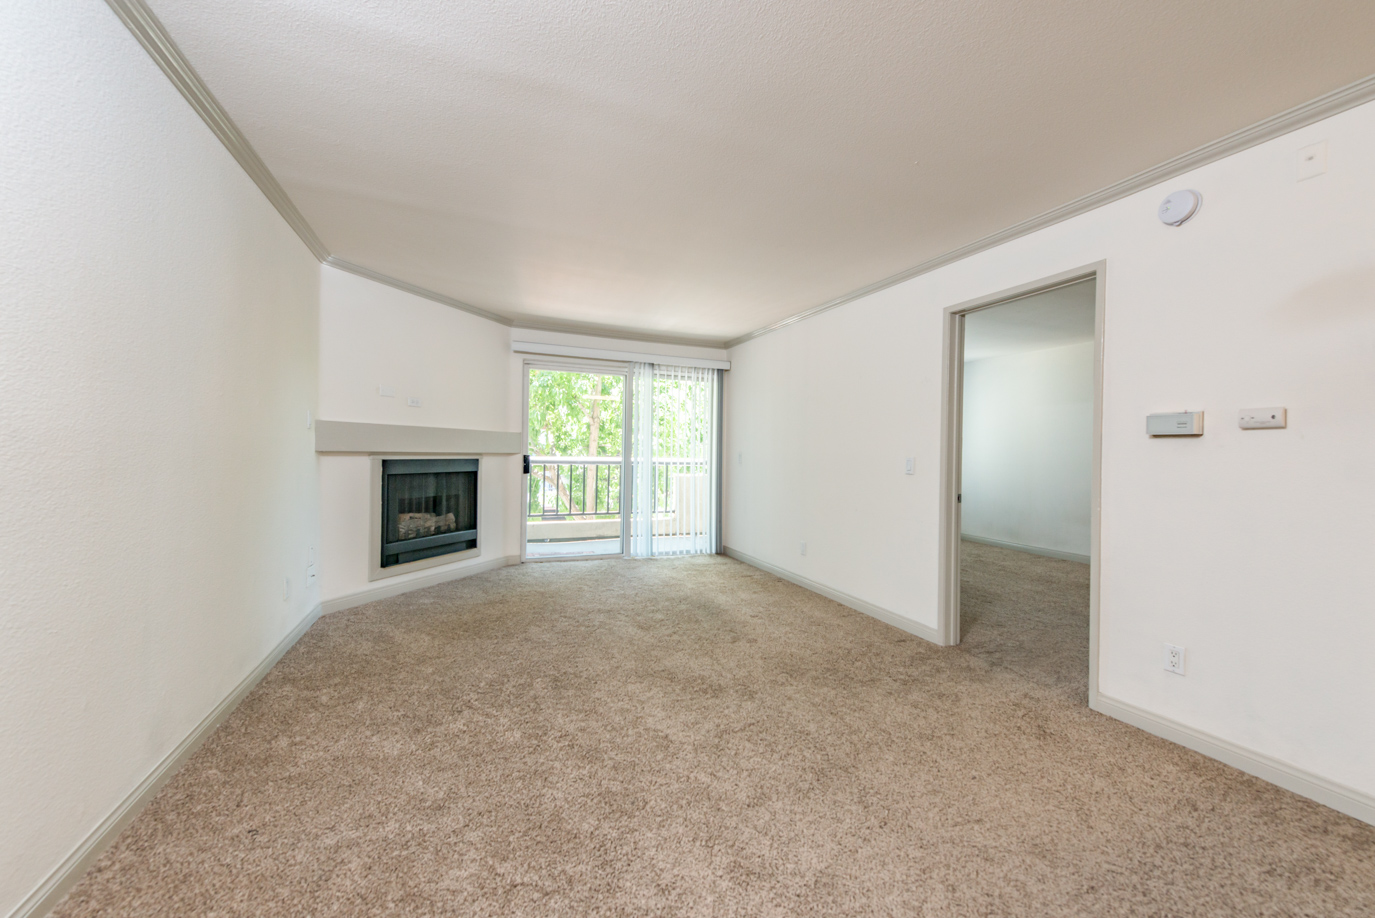 Just Sold! 1 Bed + 1 Bath at The Met Woodland Hills